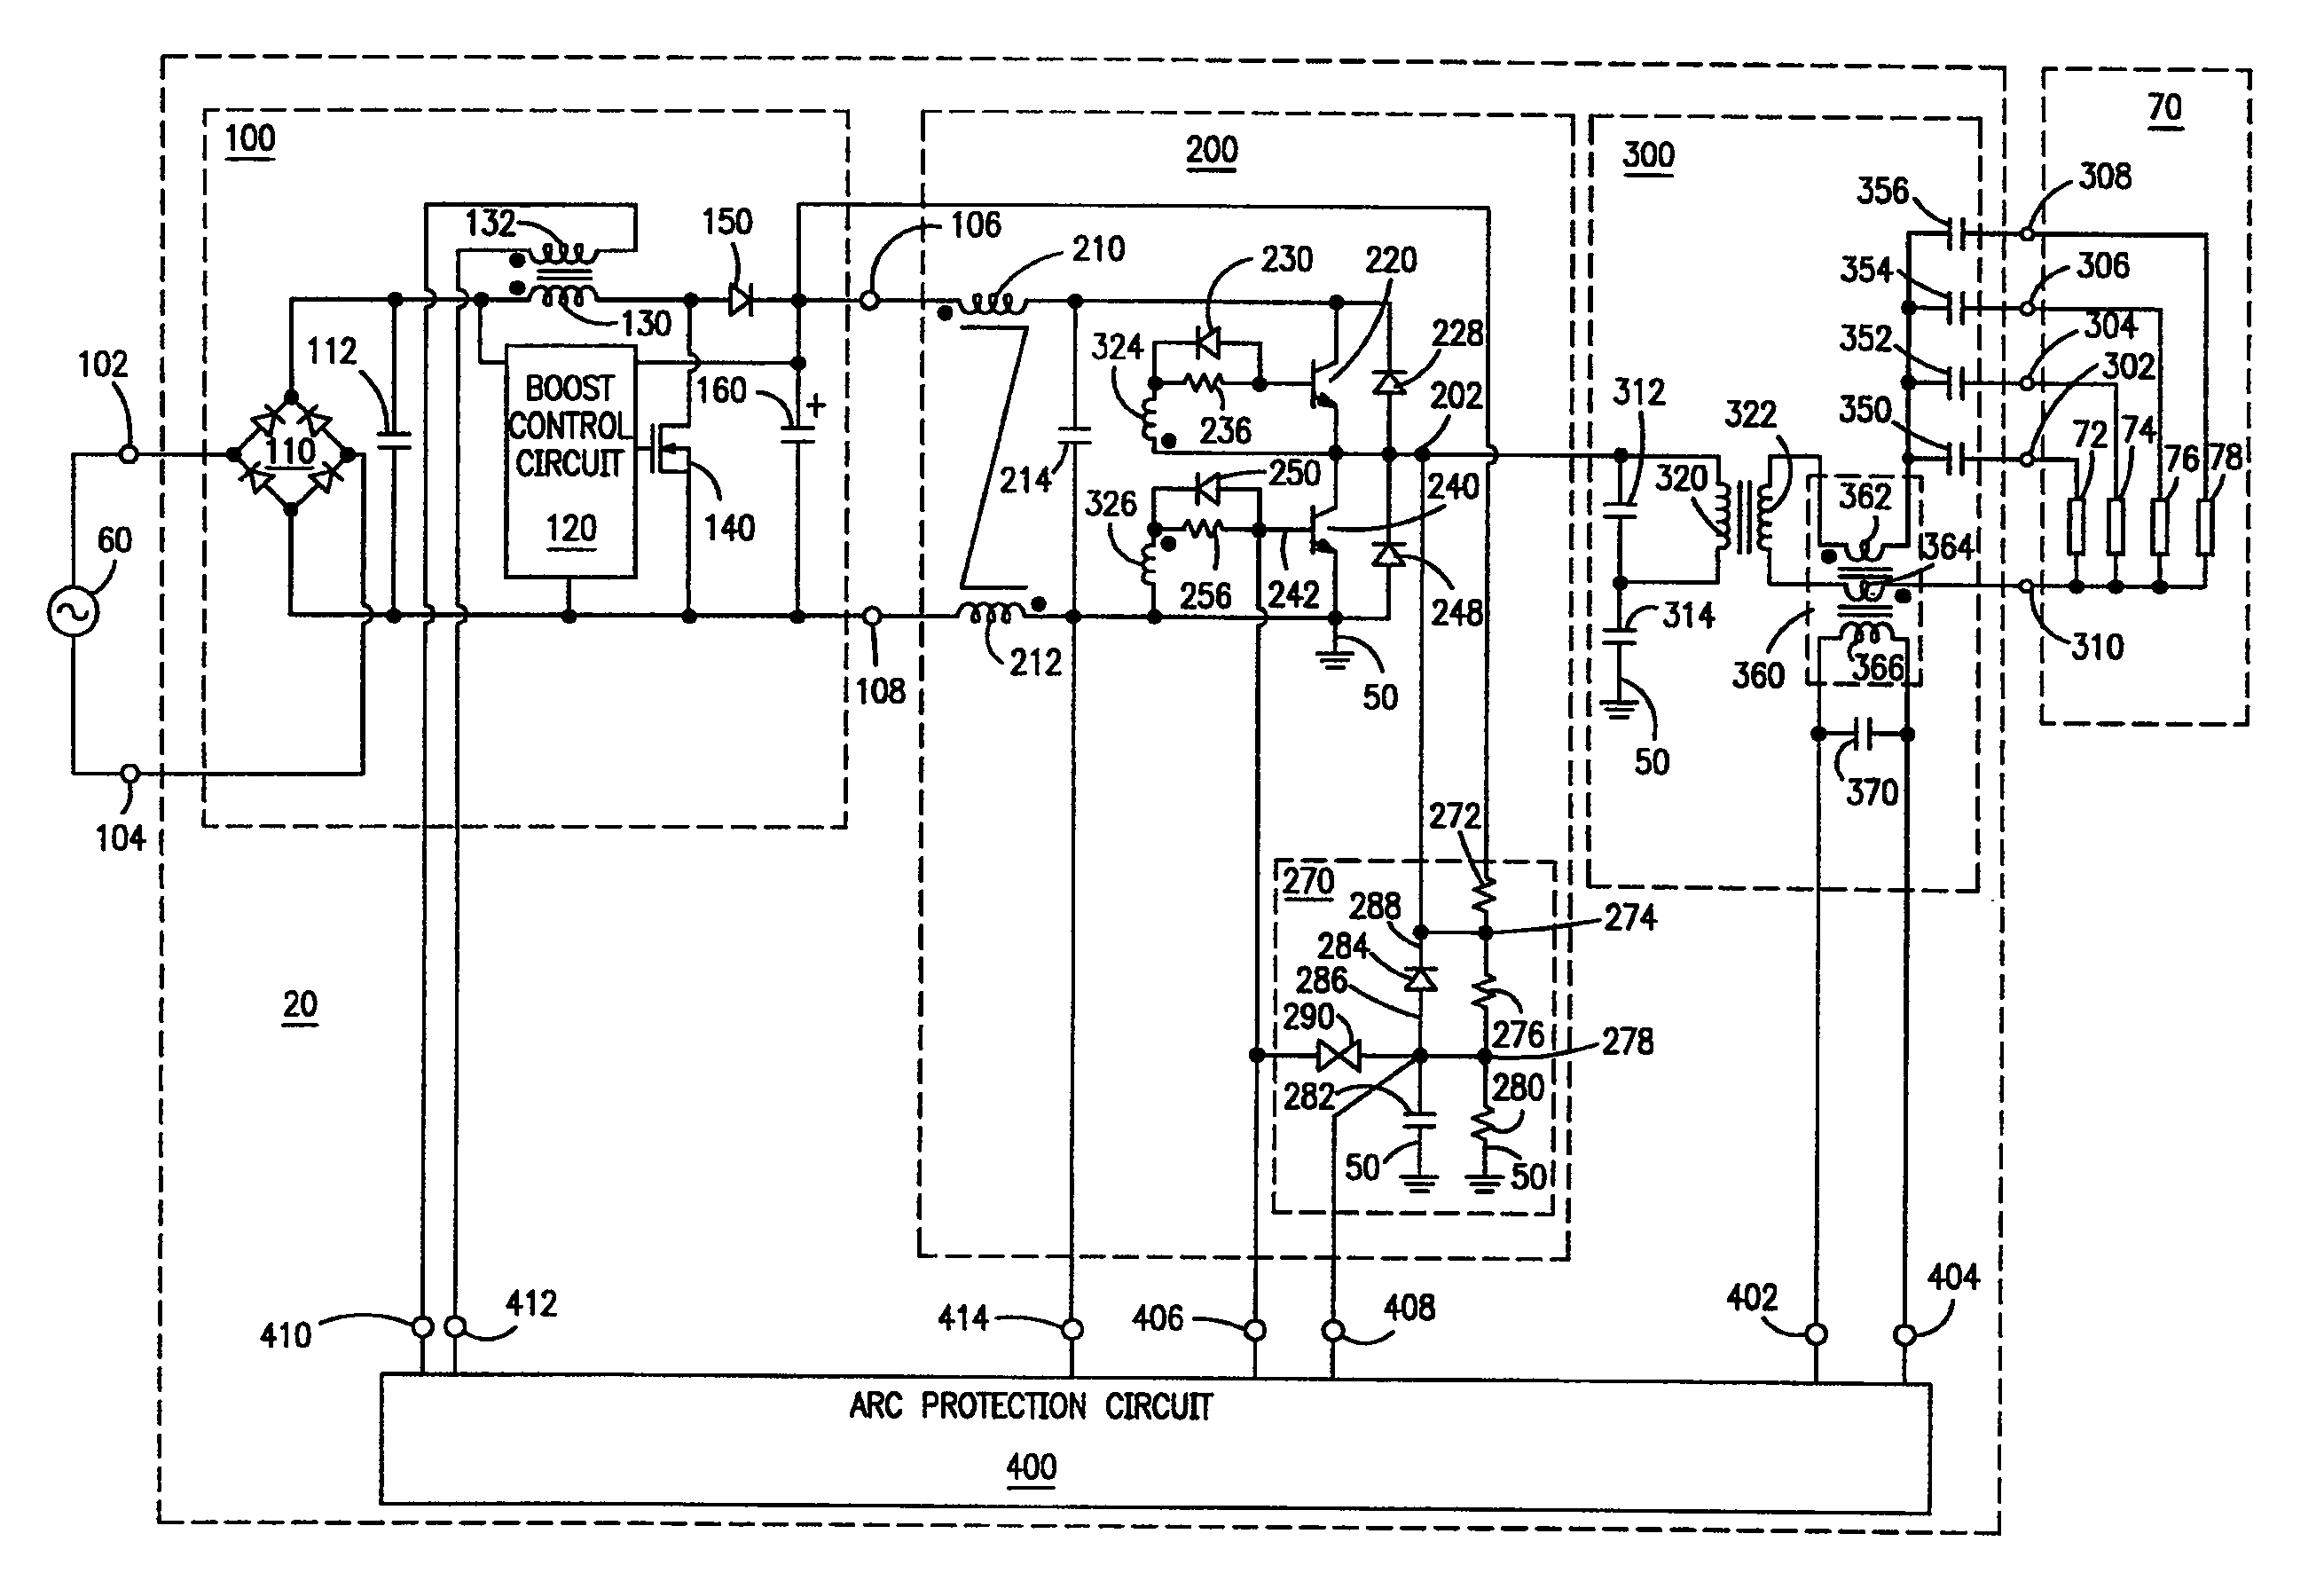 Ballast with arc protection circuit